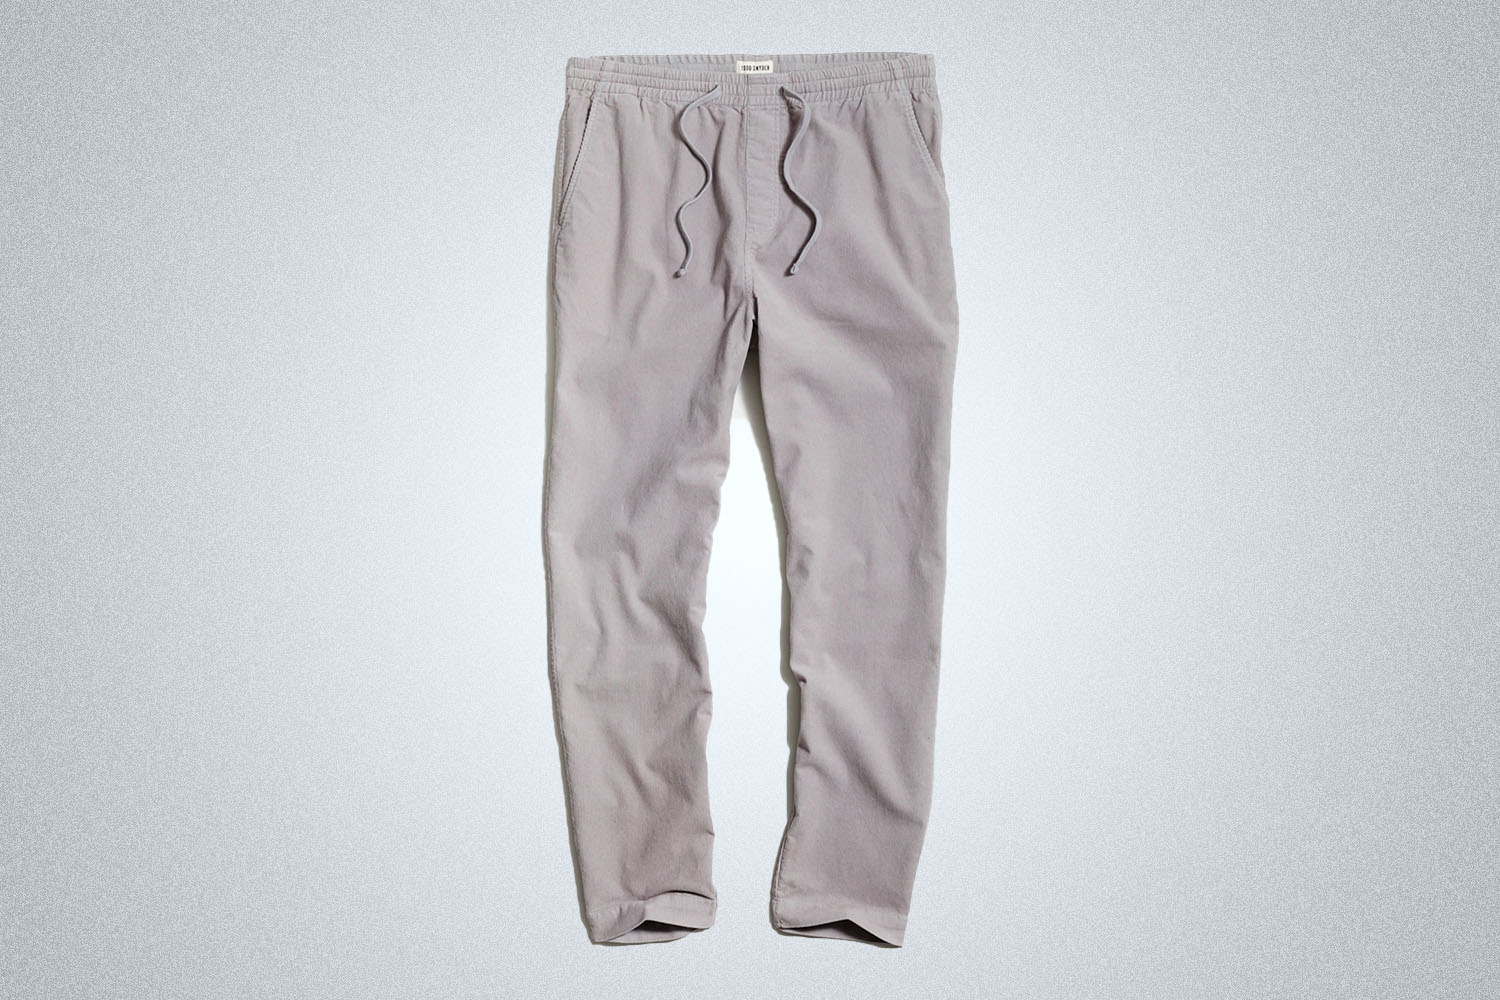 a pair of grey drawstring pants from Todd Snyder on a grey background